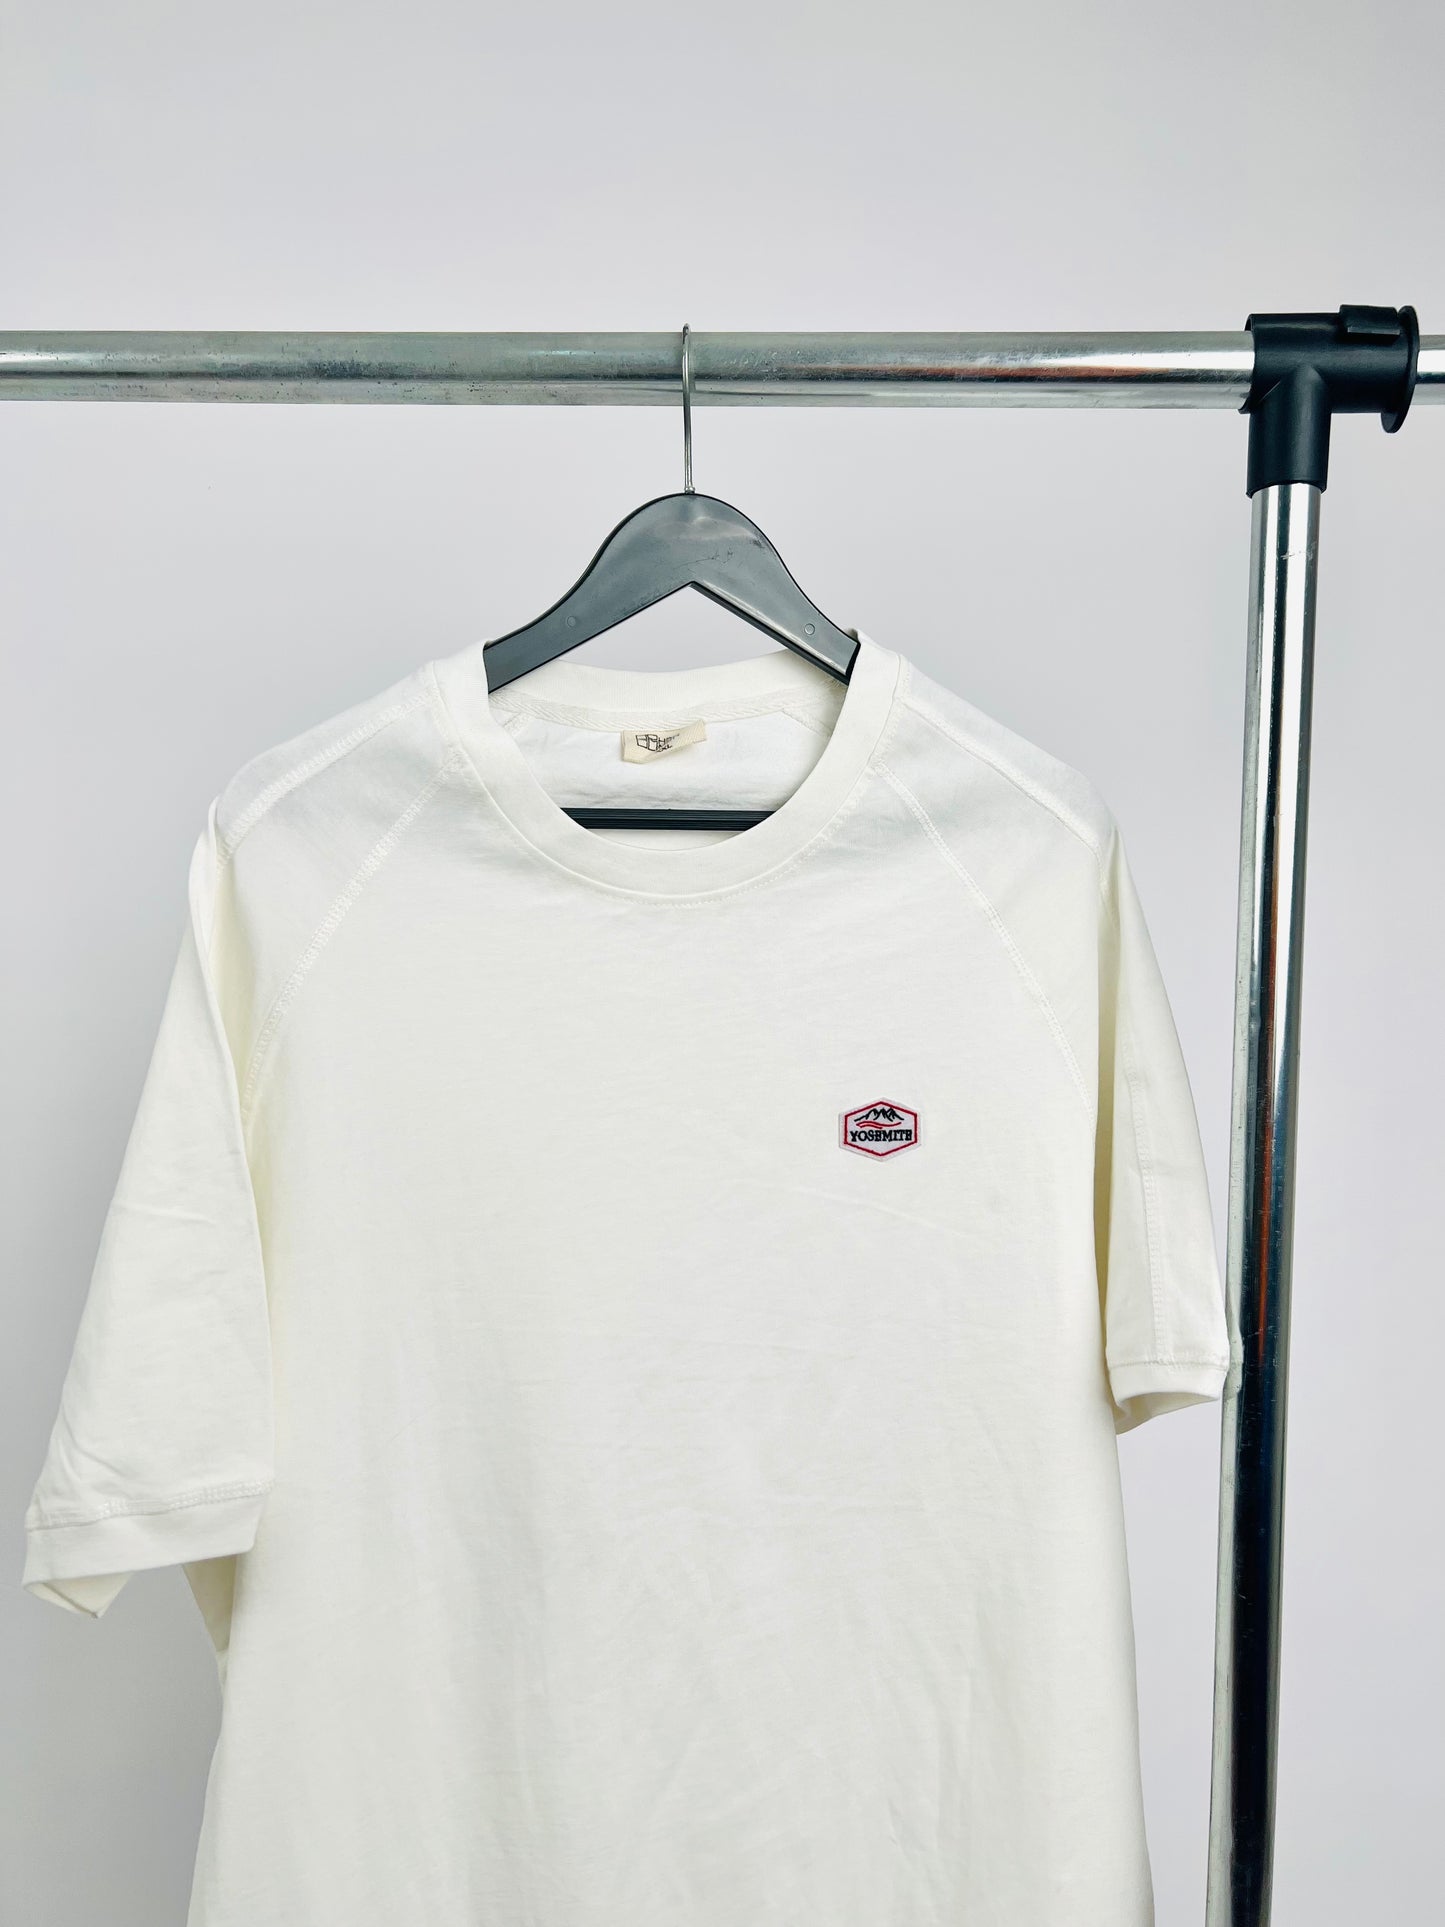 Hailys men patch T-shirt in white